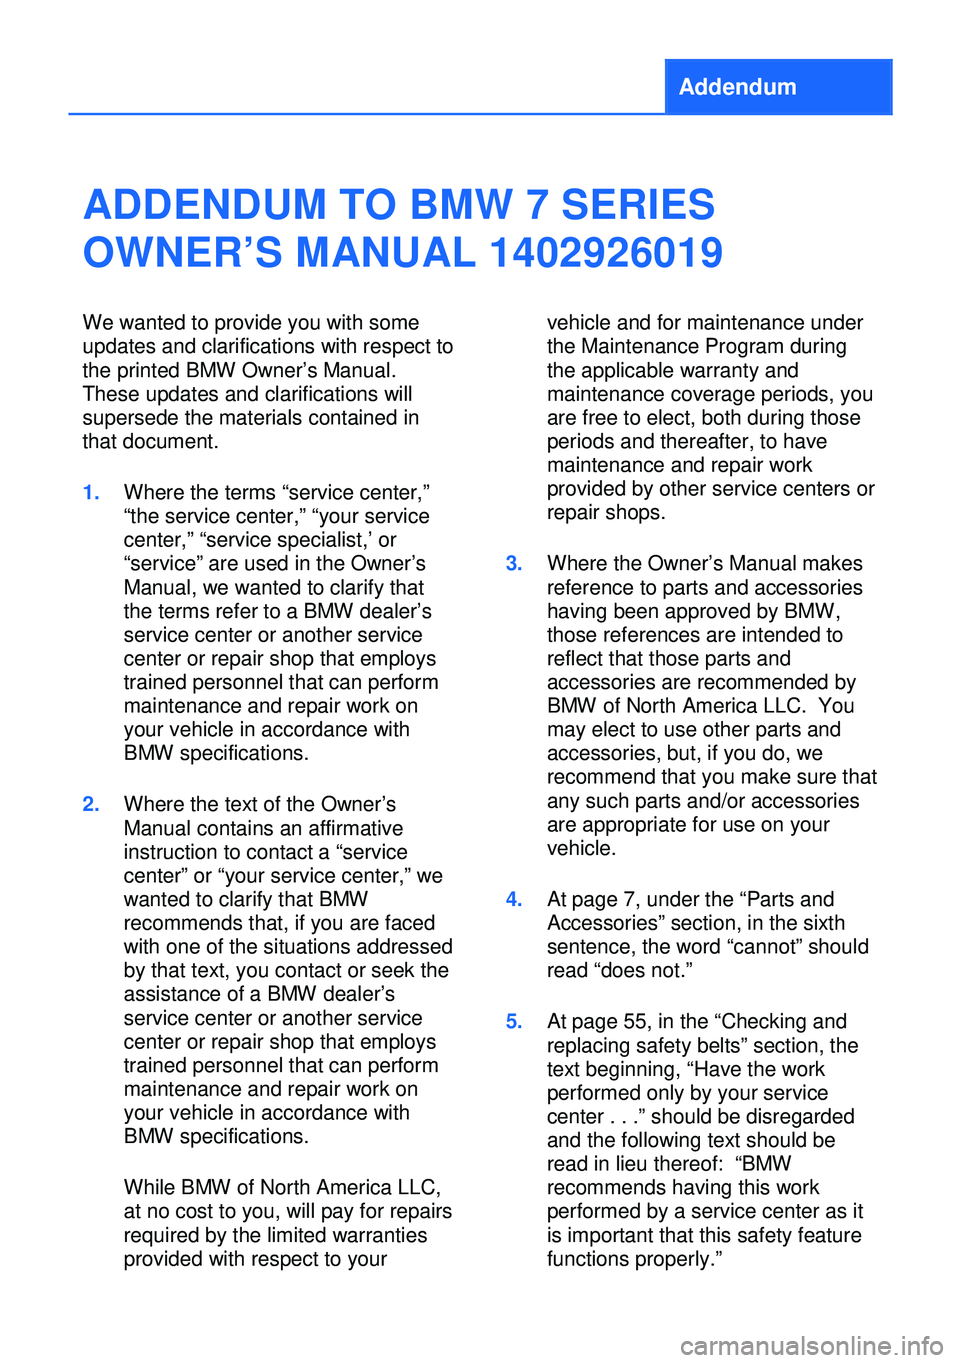 BMW 7 SERIES 2013 F01 Owners Manual Addendum
ADDENDUM TO BMW 7 SERIES
OWNER’S MANUAL 1402926019
We wanted to provide you with some
updates and clarifications with respect to
the printed BMW Owner’s Manual.
These updates and clarific